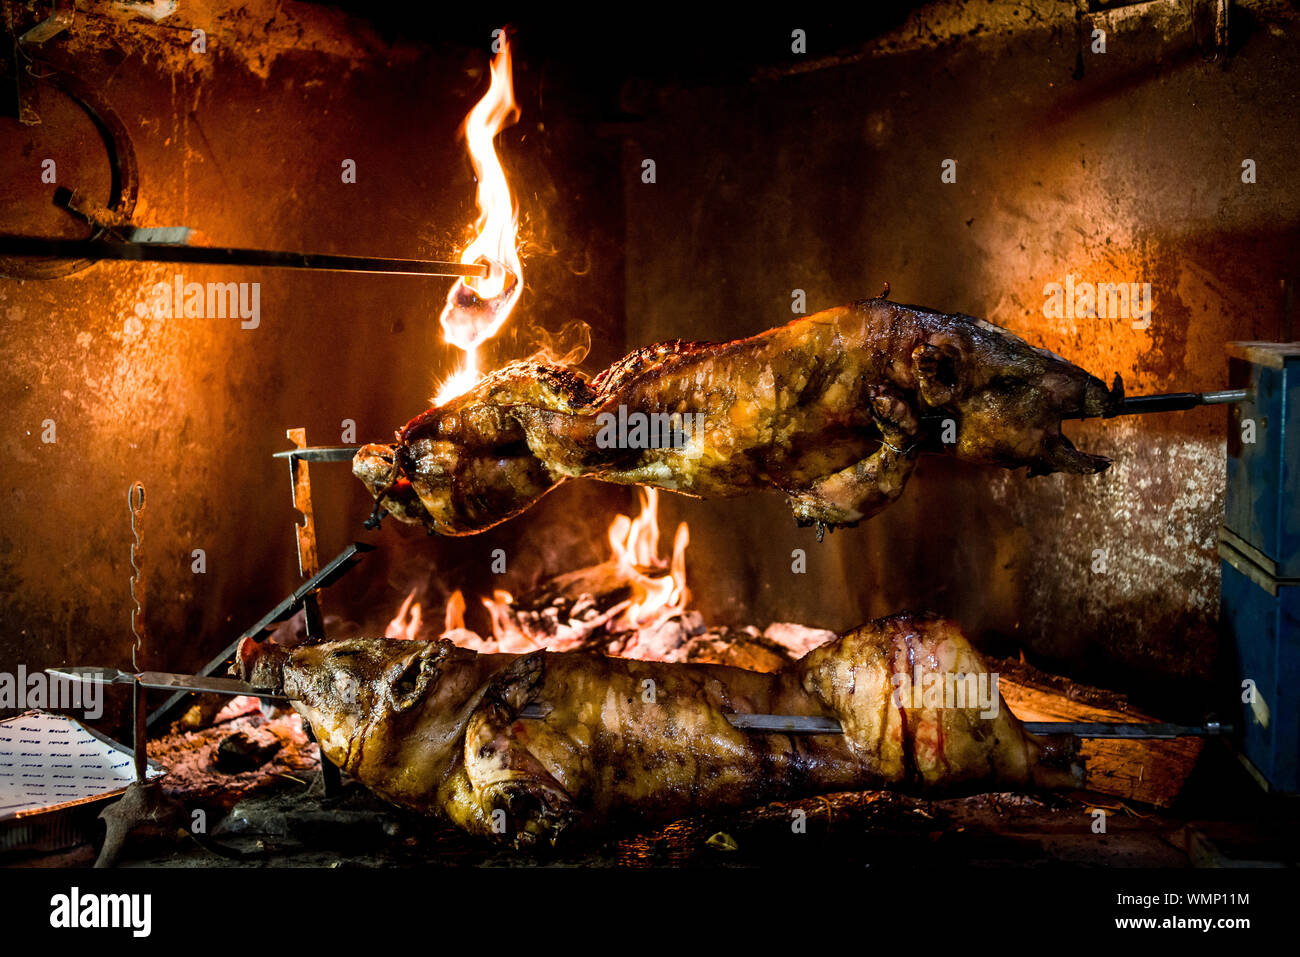 Grilled pigs on spit above the grill at the fireplace in Sardinia, Italy Stock Photo